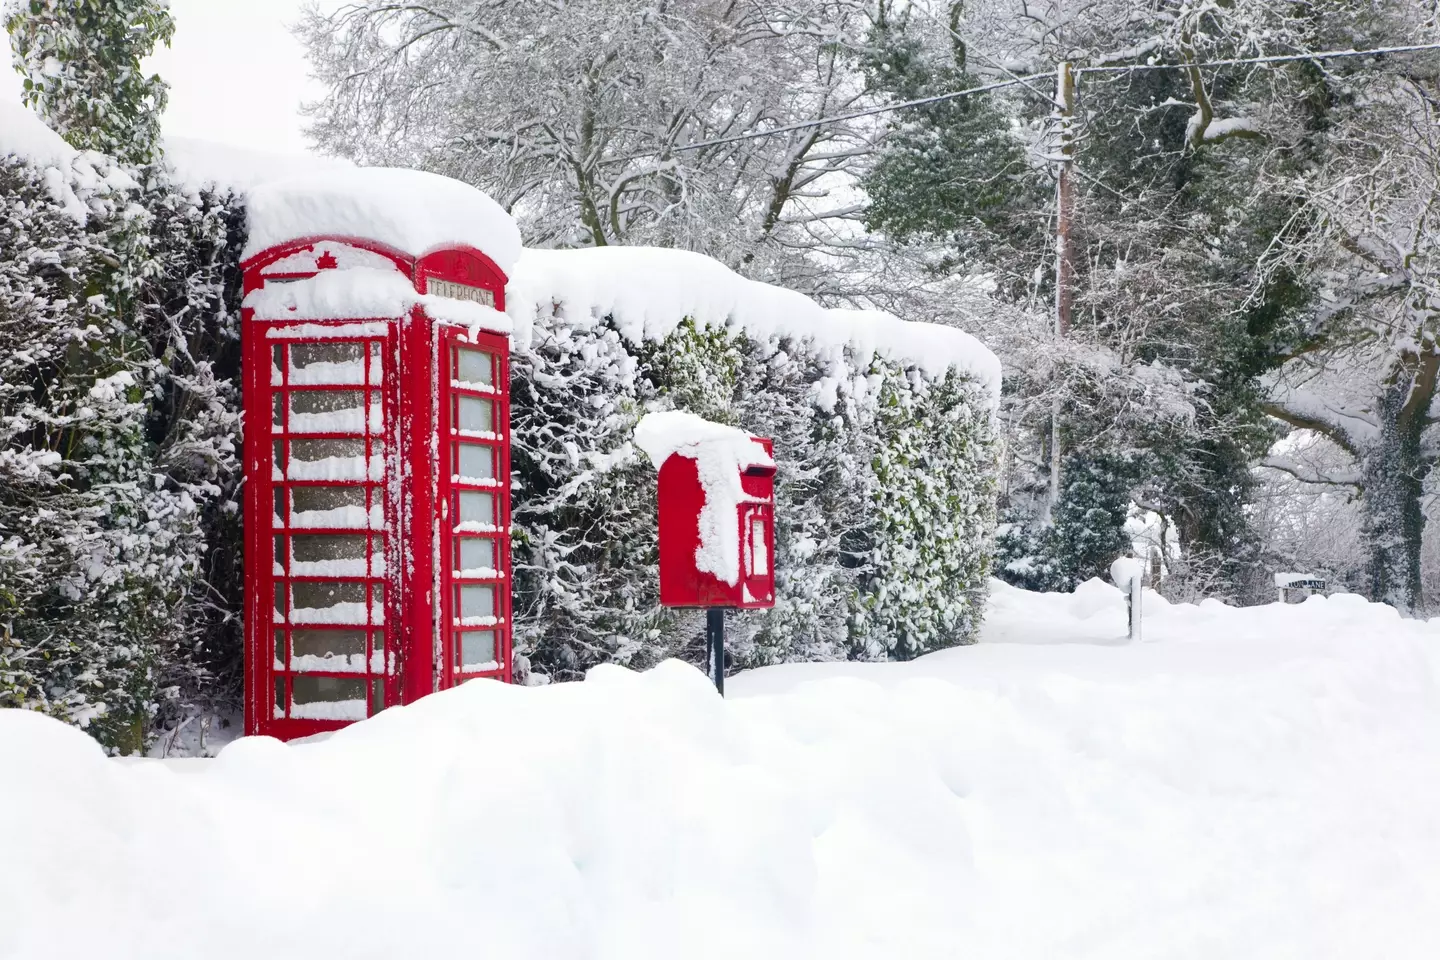 The forecasters have predicted the heaviest snow is set to fall over the North Downs of the Sussex.